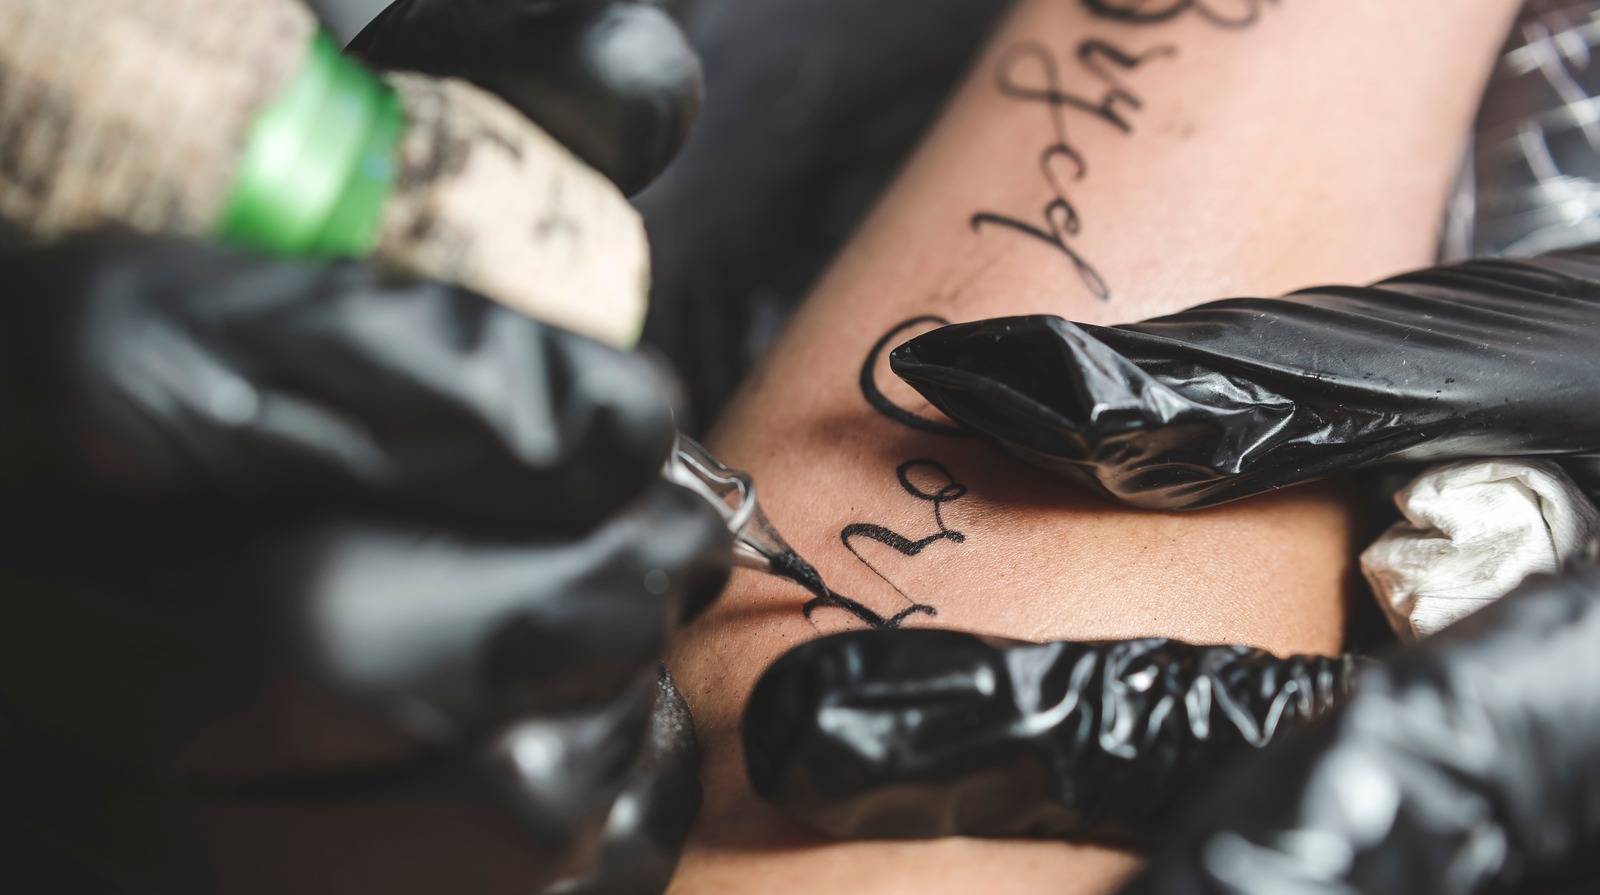 Ingenious Tattoo Ink Designed to Disappear from Skin After a Year